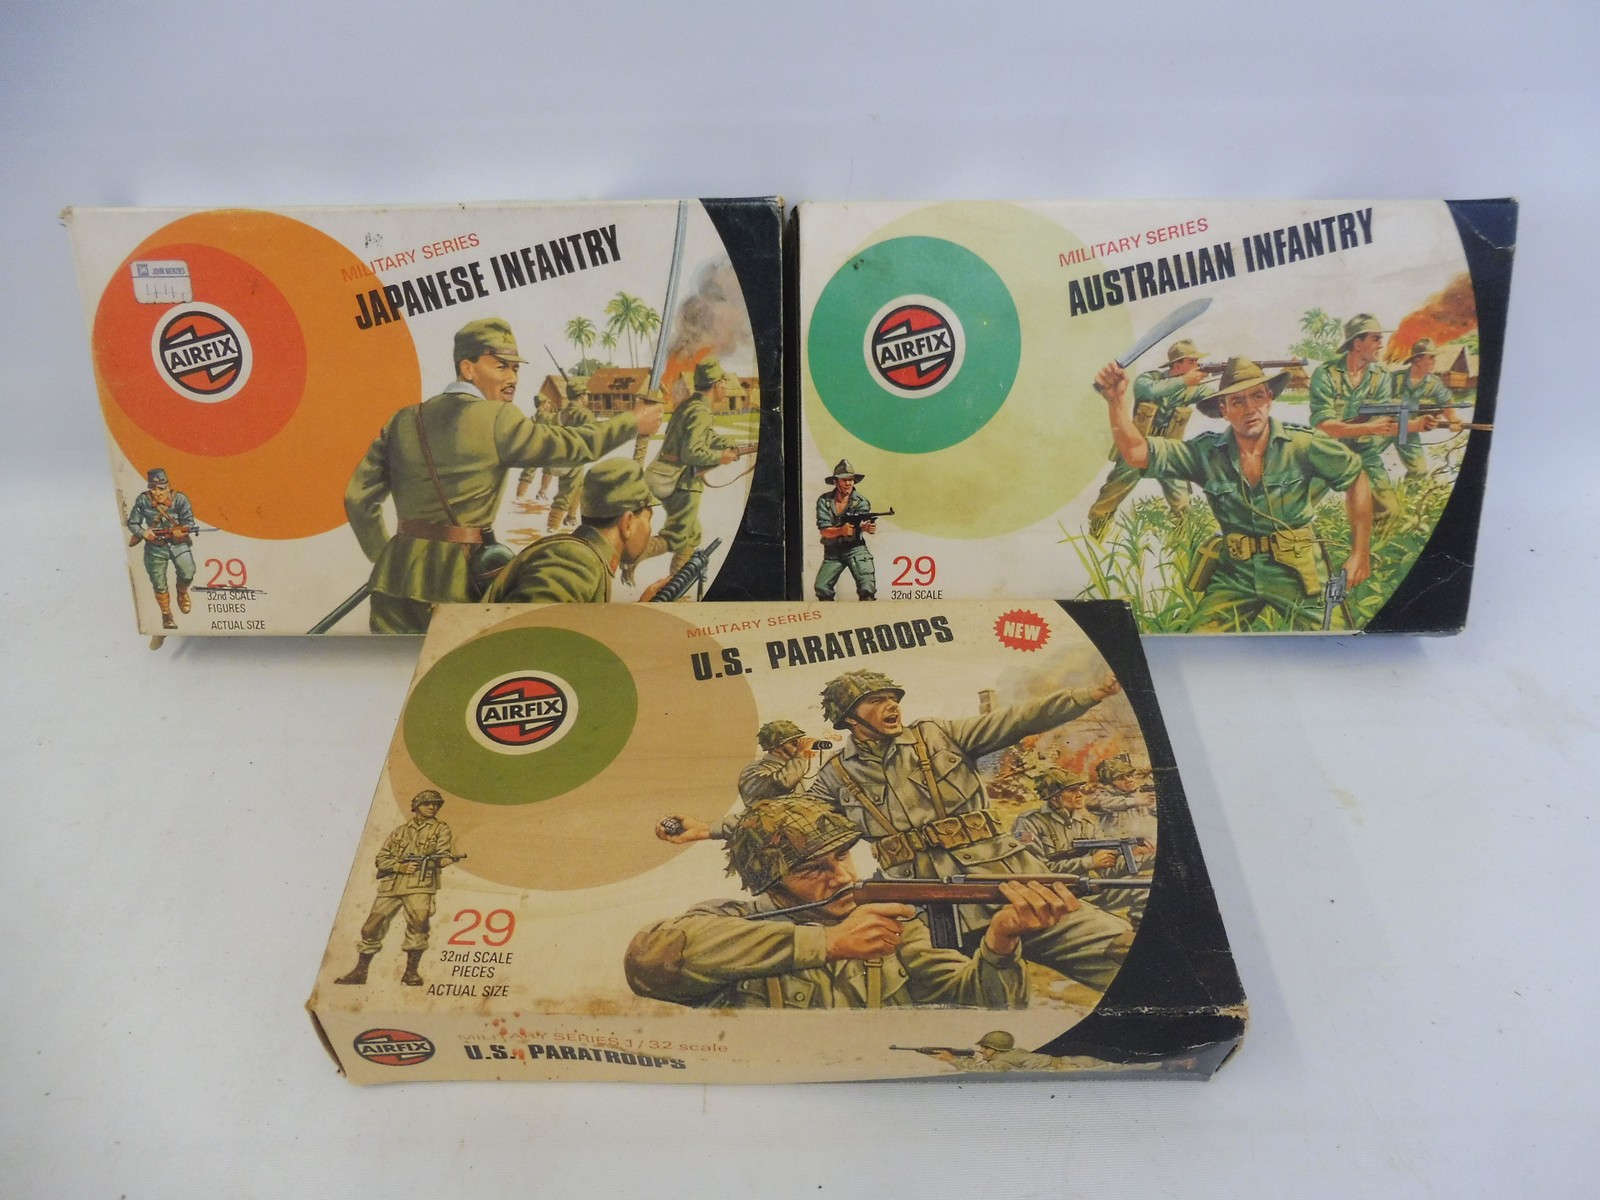 Three 1/32 scale Airfix plastic soldiers circa 1973/1975: Japanese Infantry, Australian Infantry and